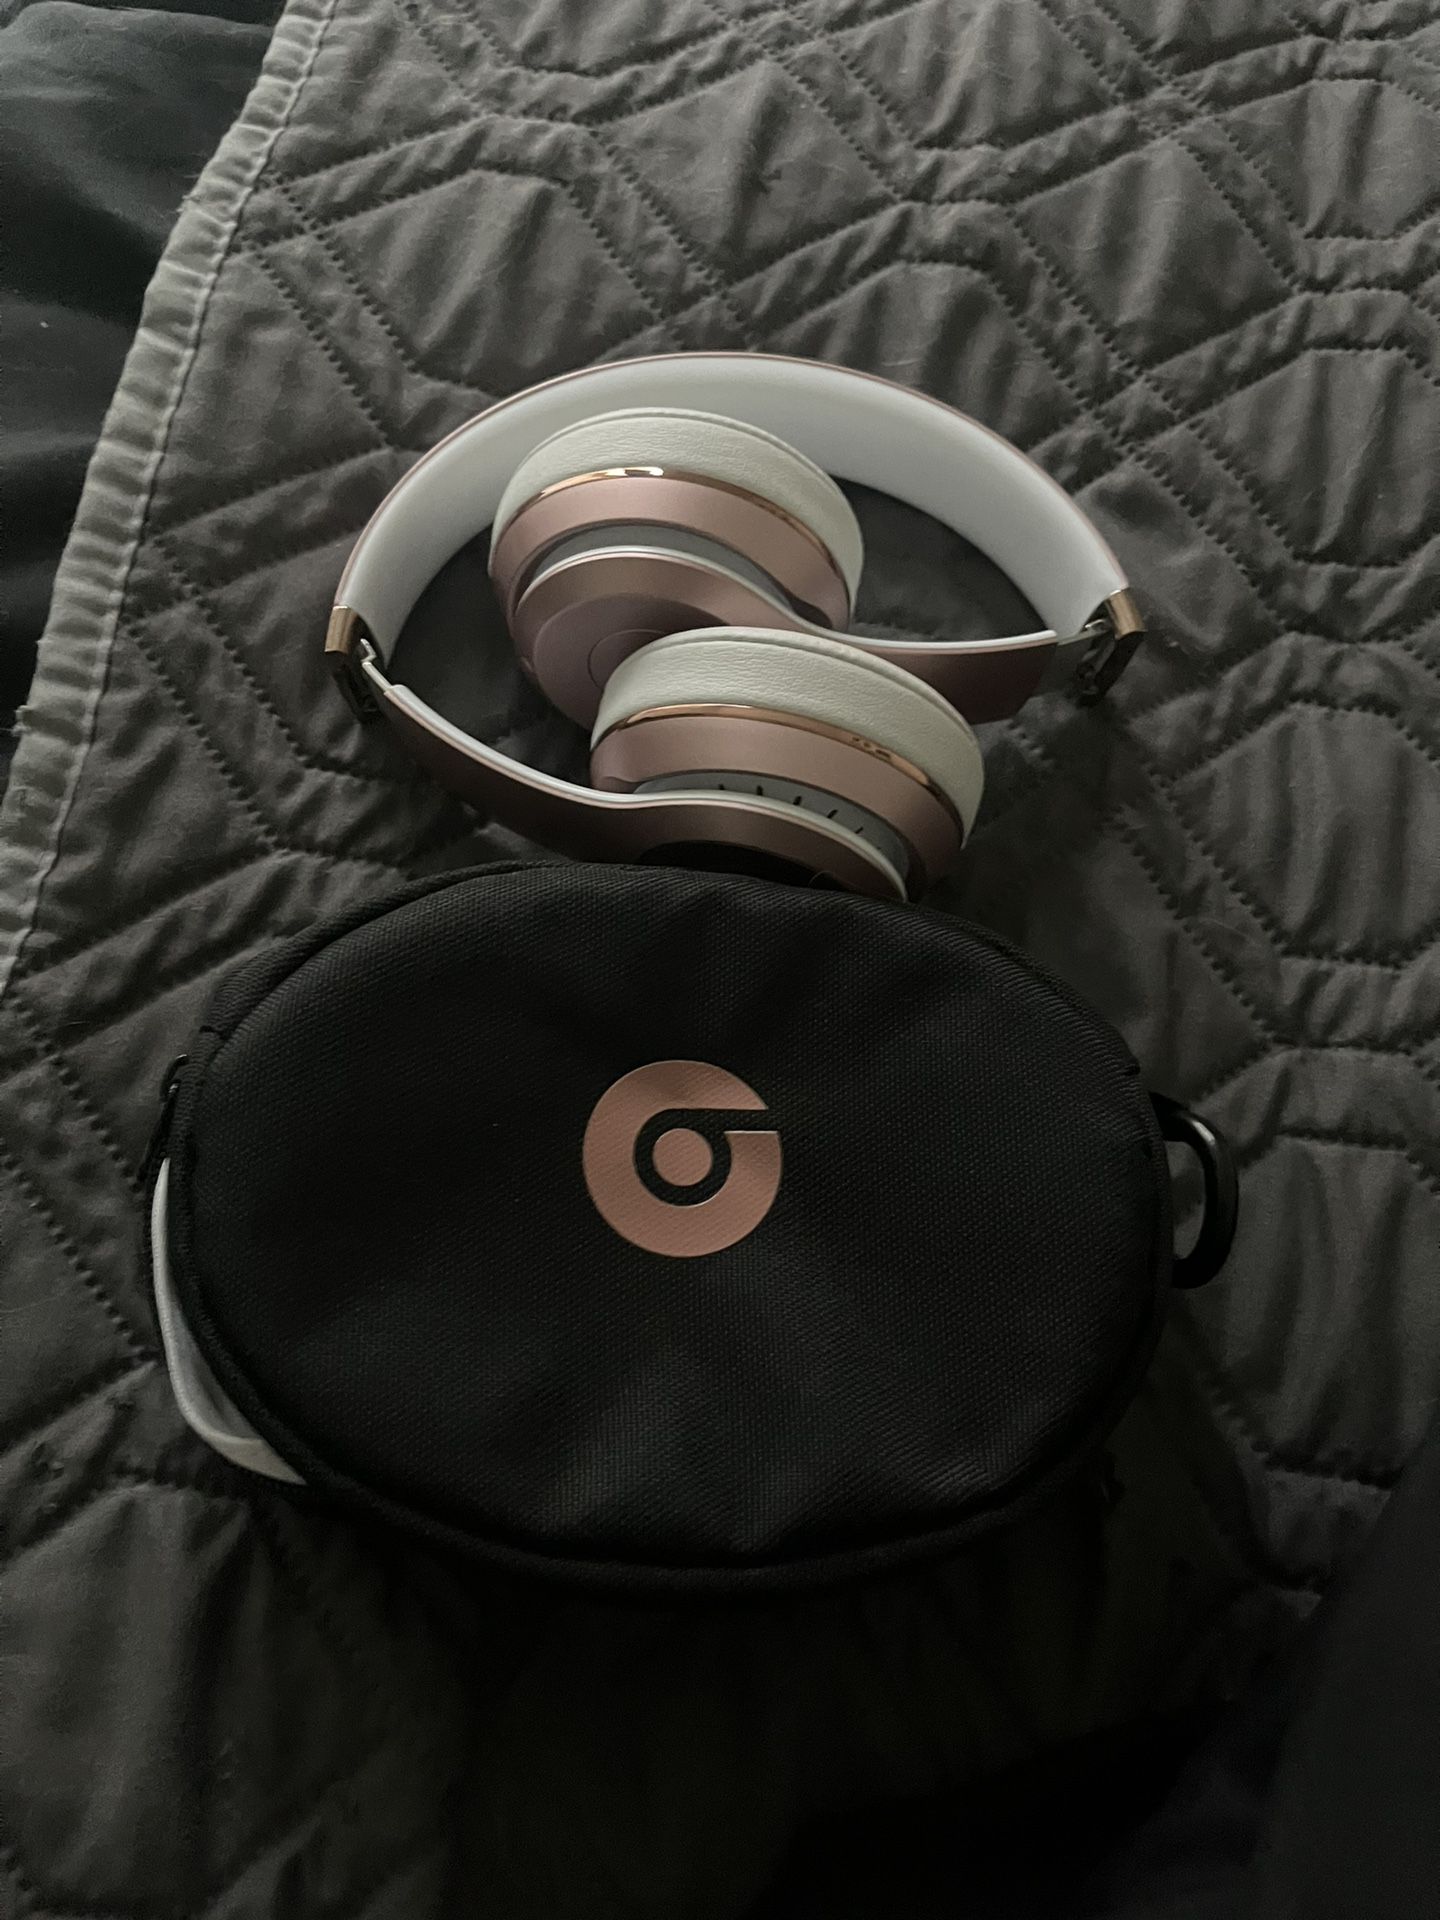 Beats Solo3 Bluetooth Headphones Wireless All-Day On-ear Headphones - Rose Gold